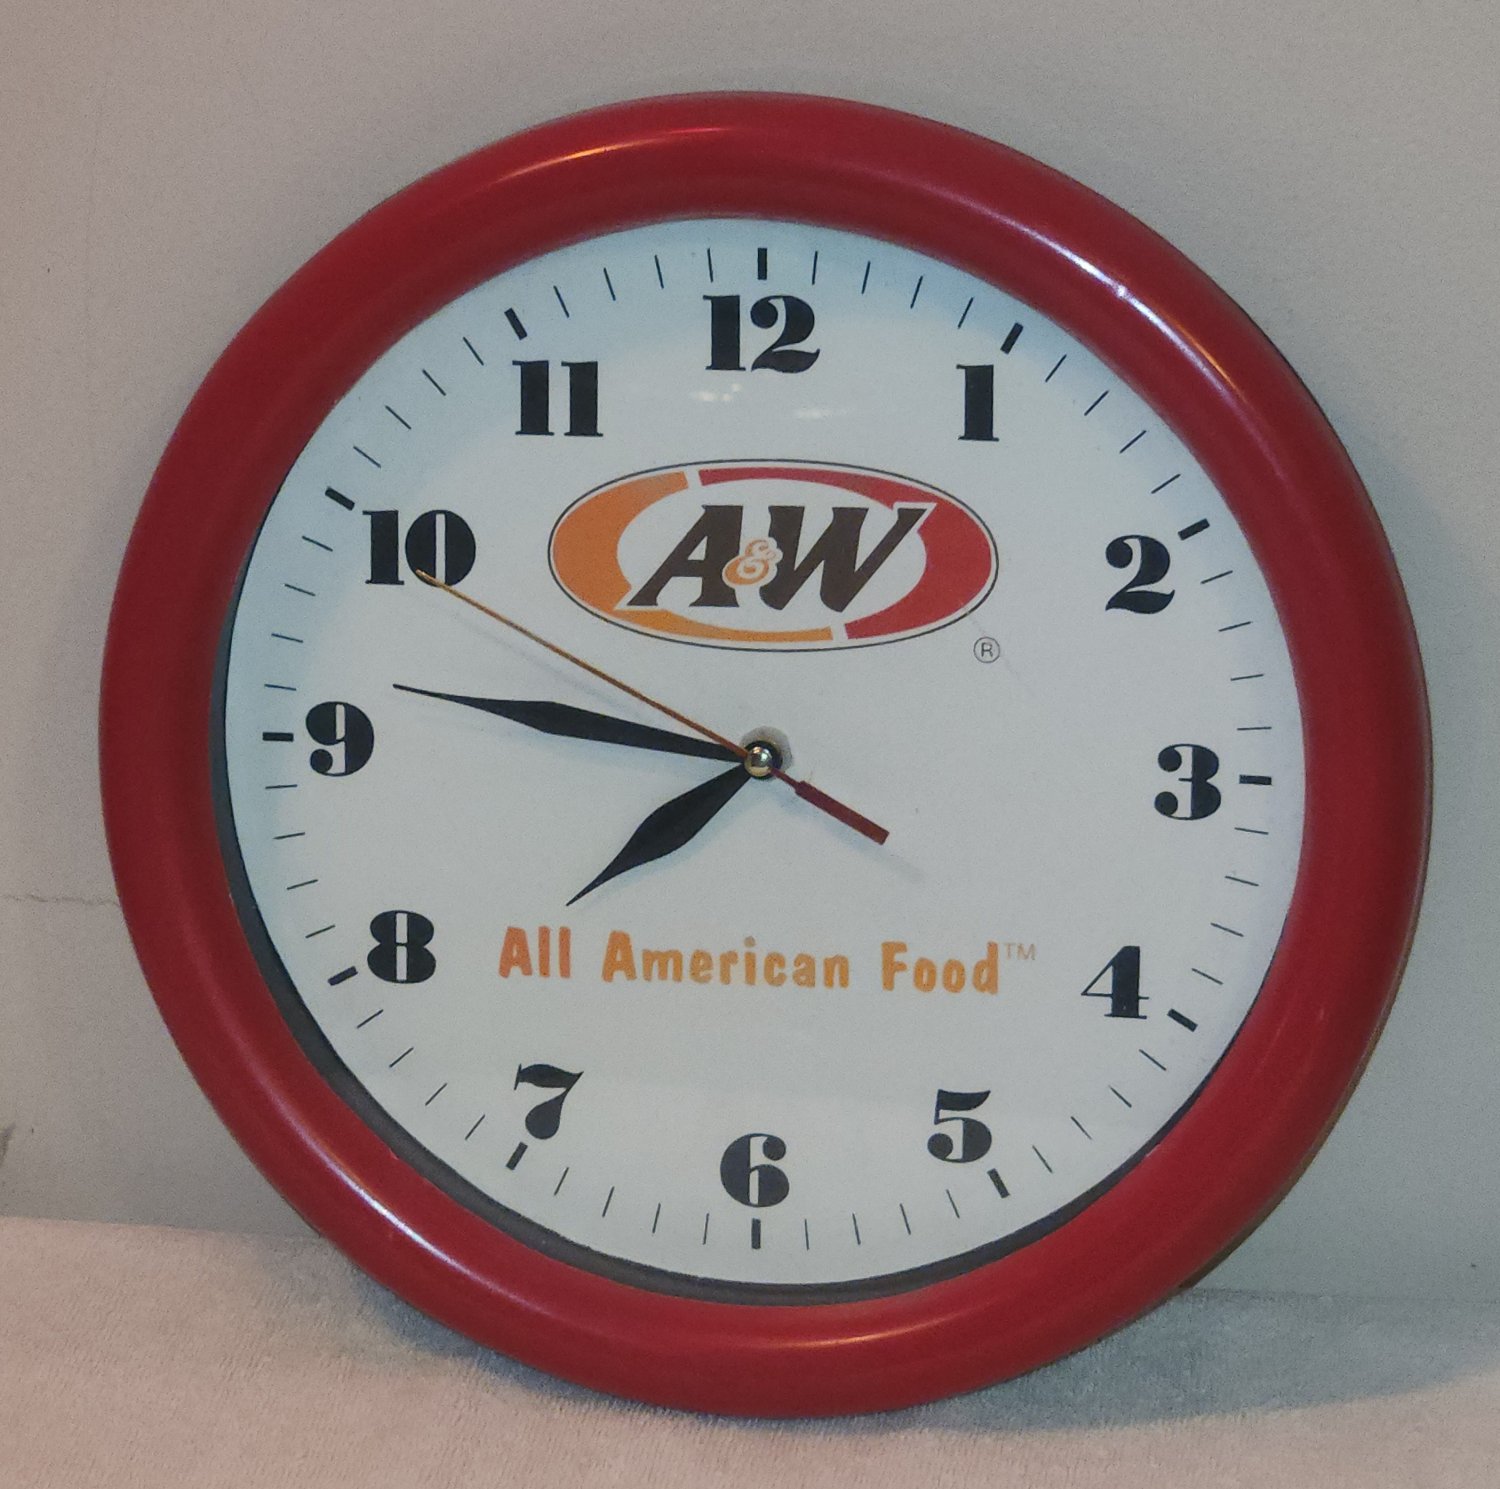 A&W All American Food Battery Operated Wall Clock Root Beer Analog Red Round Plastic